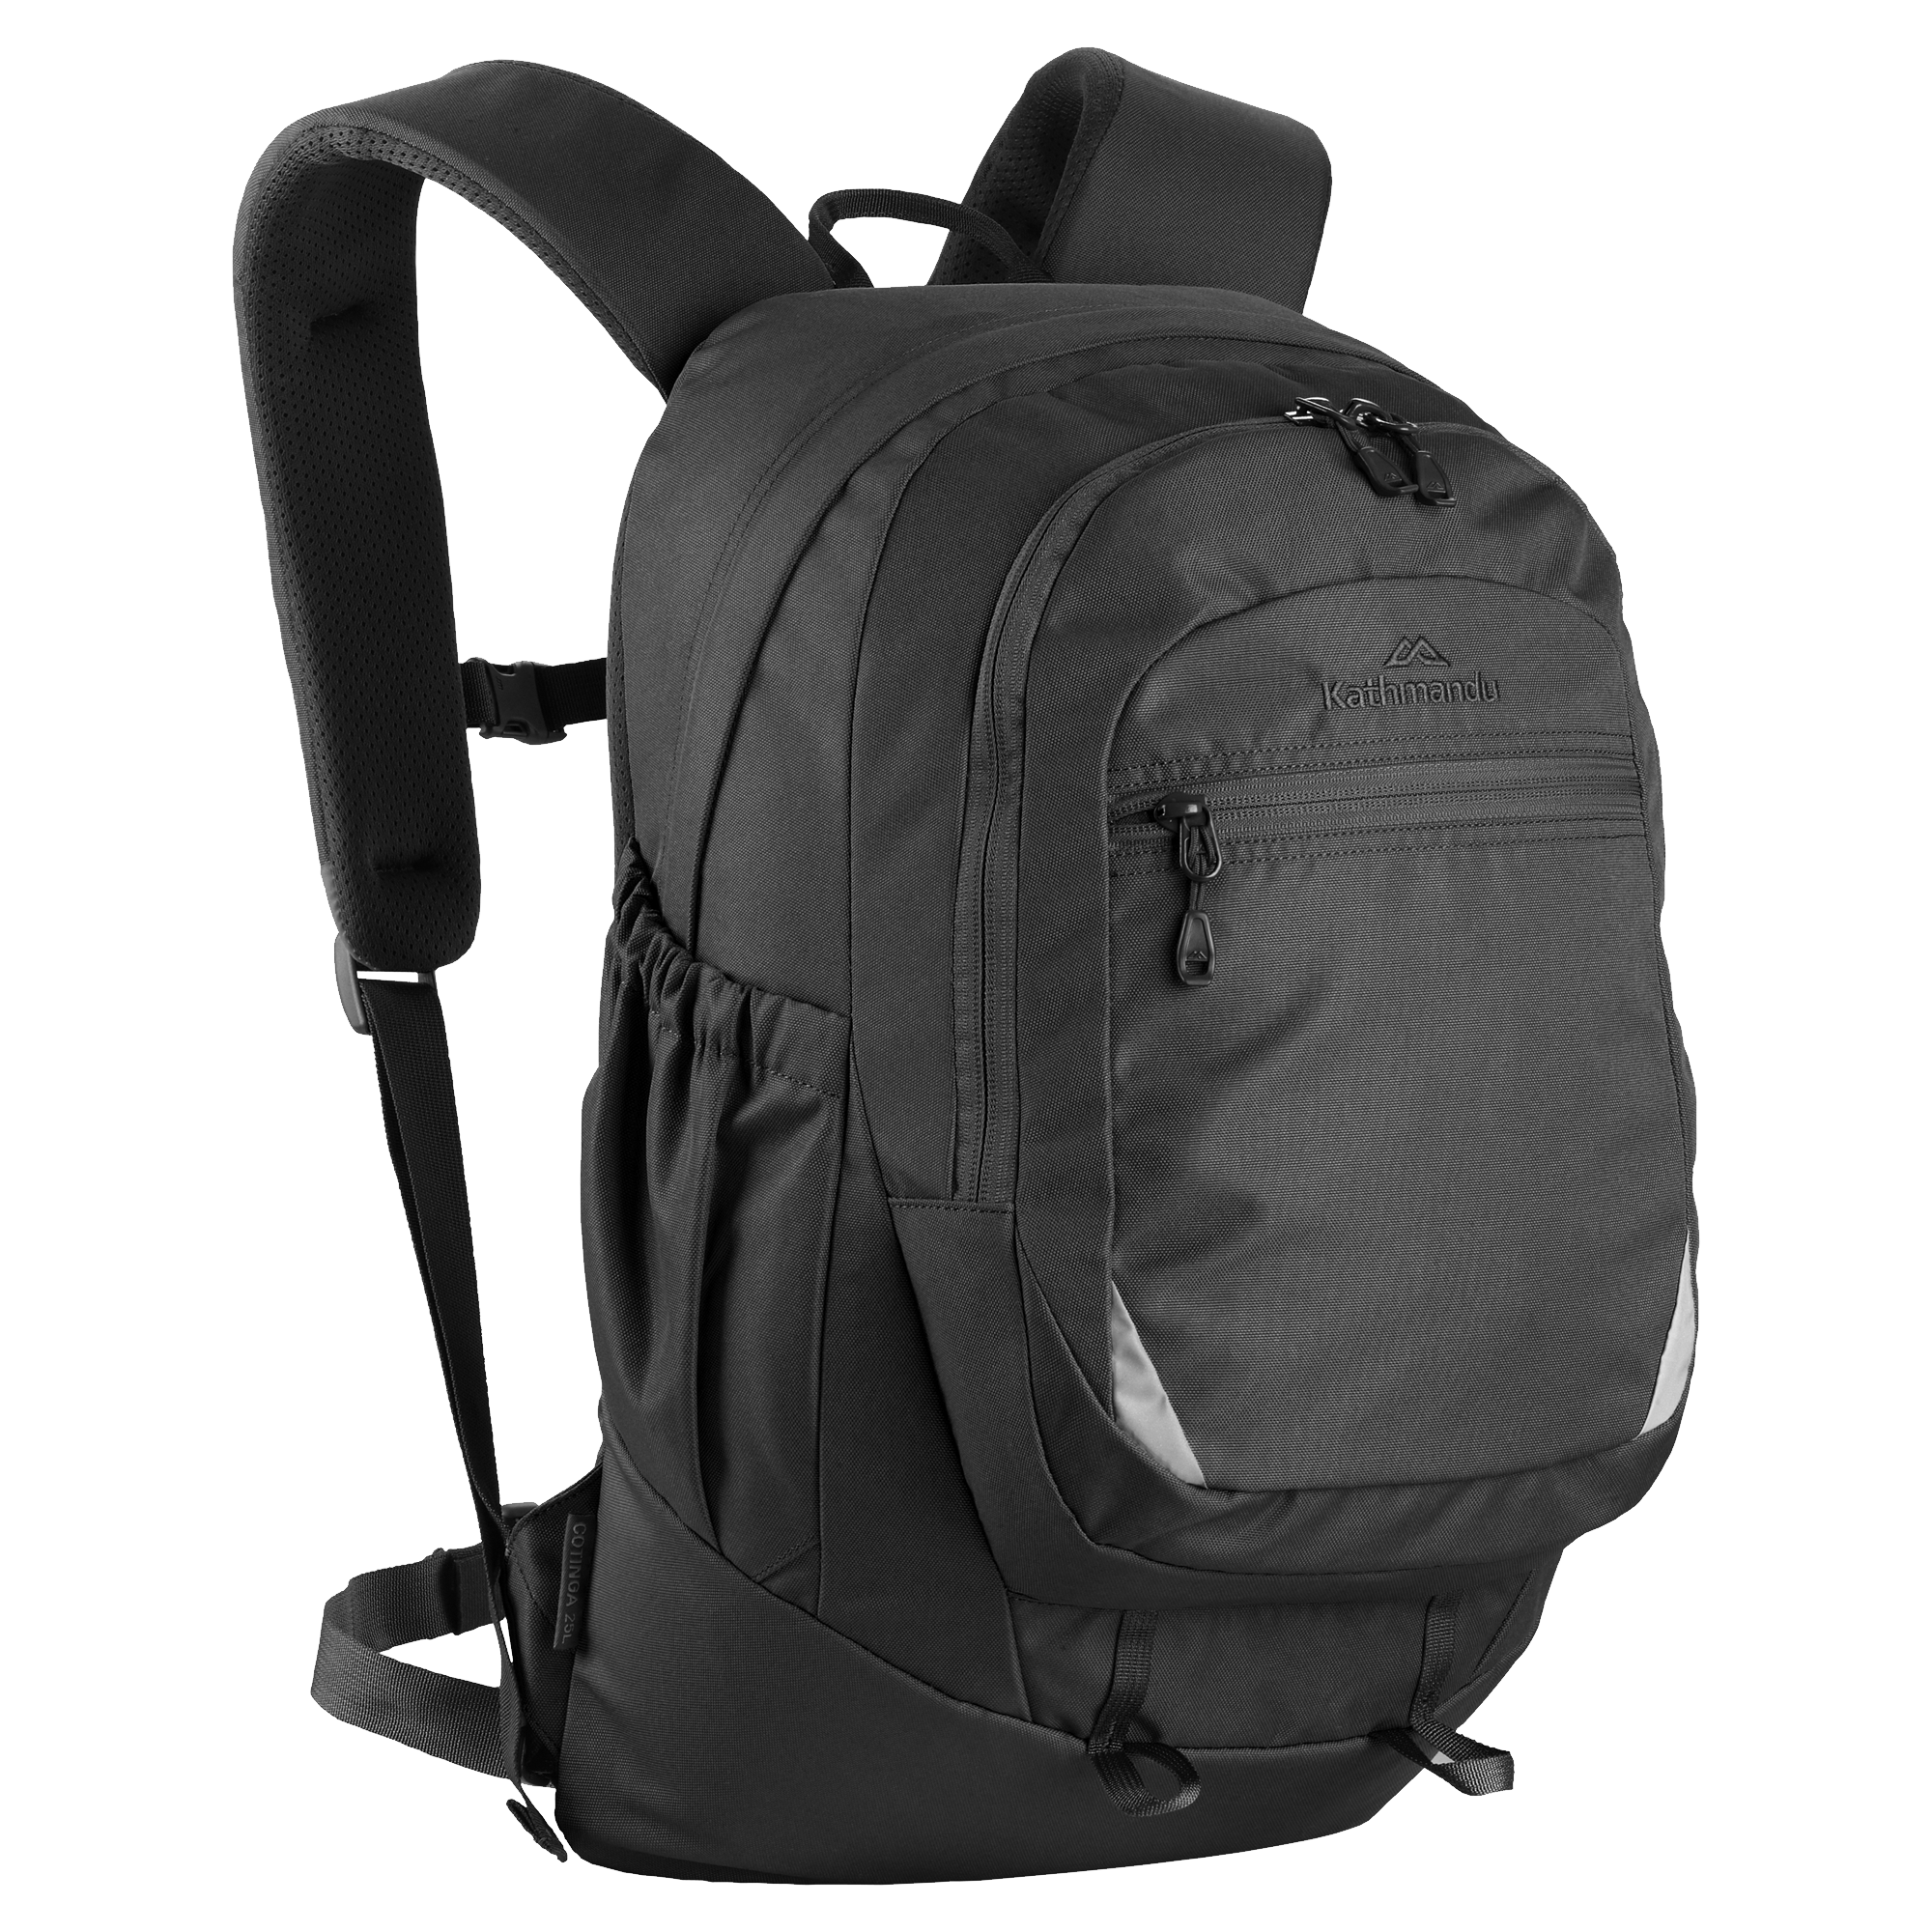 Backpack PNG images free download.